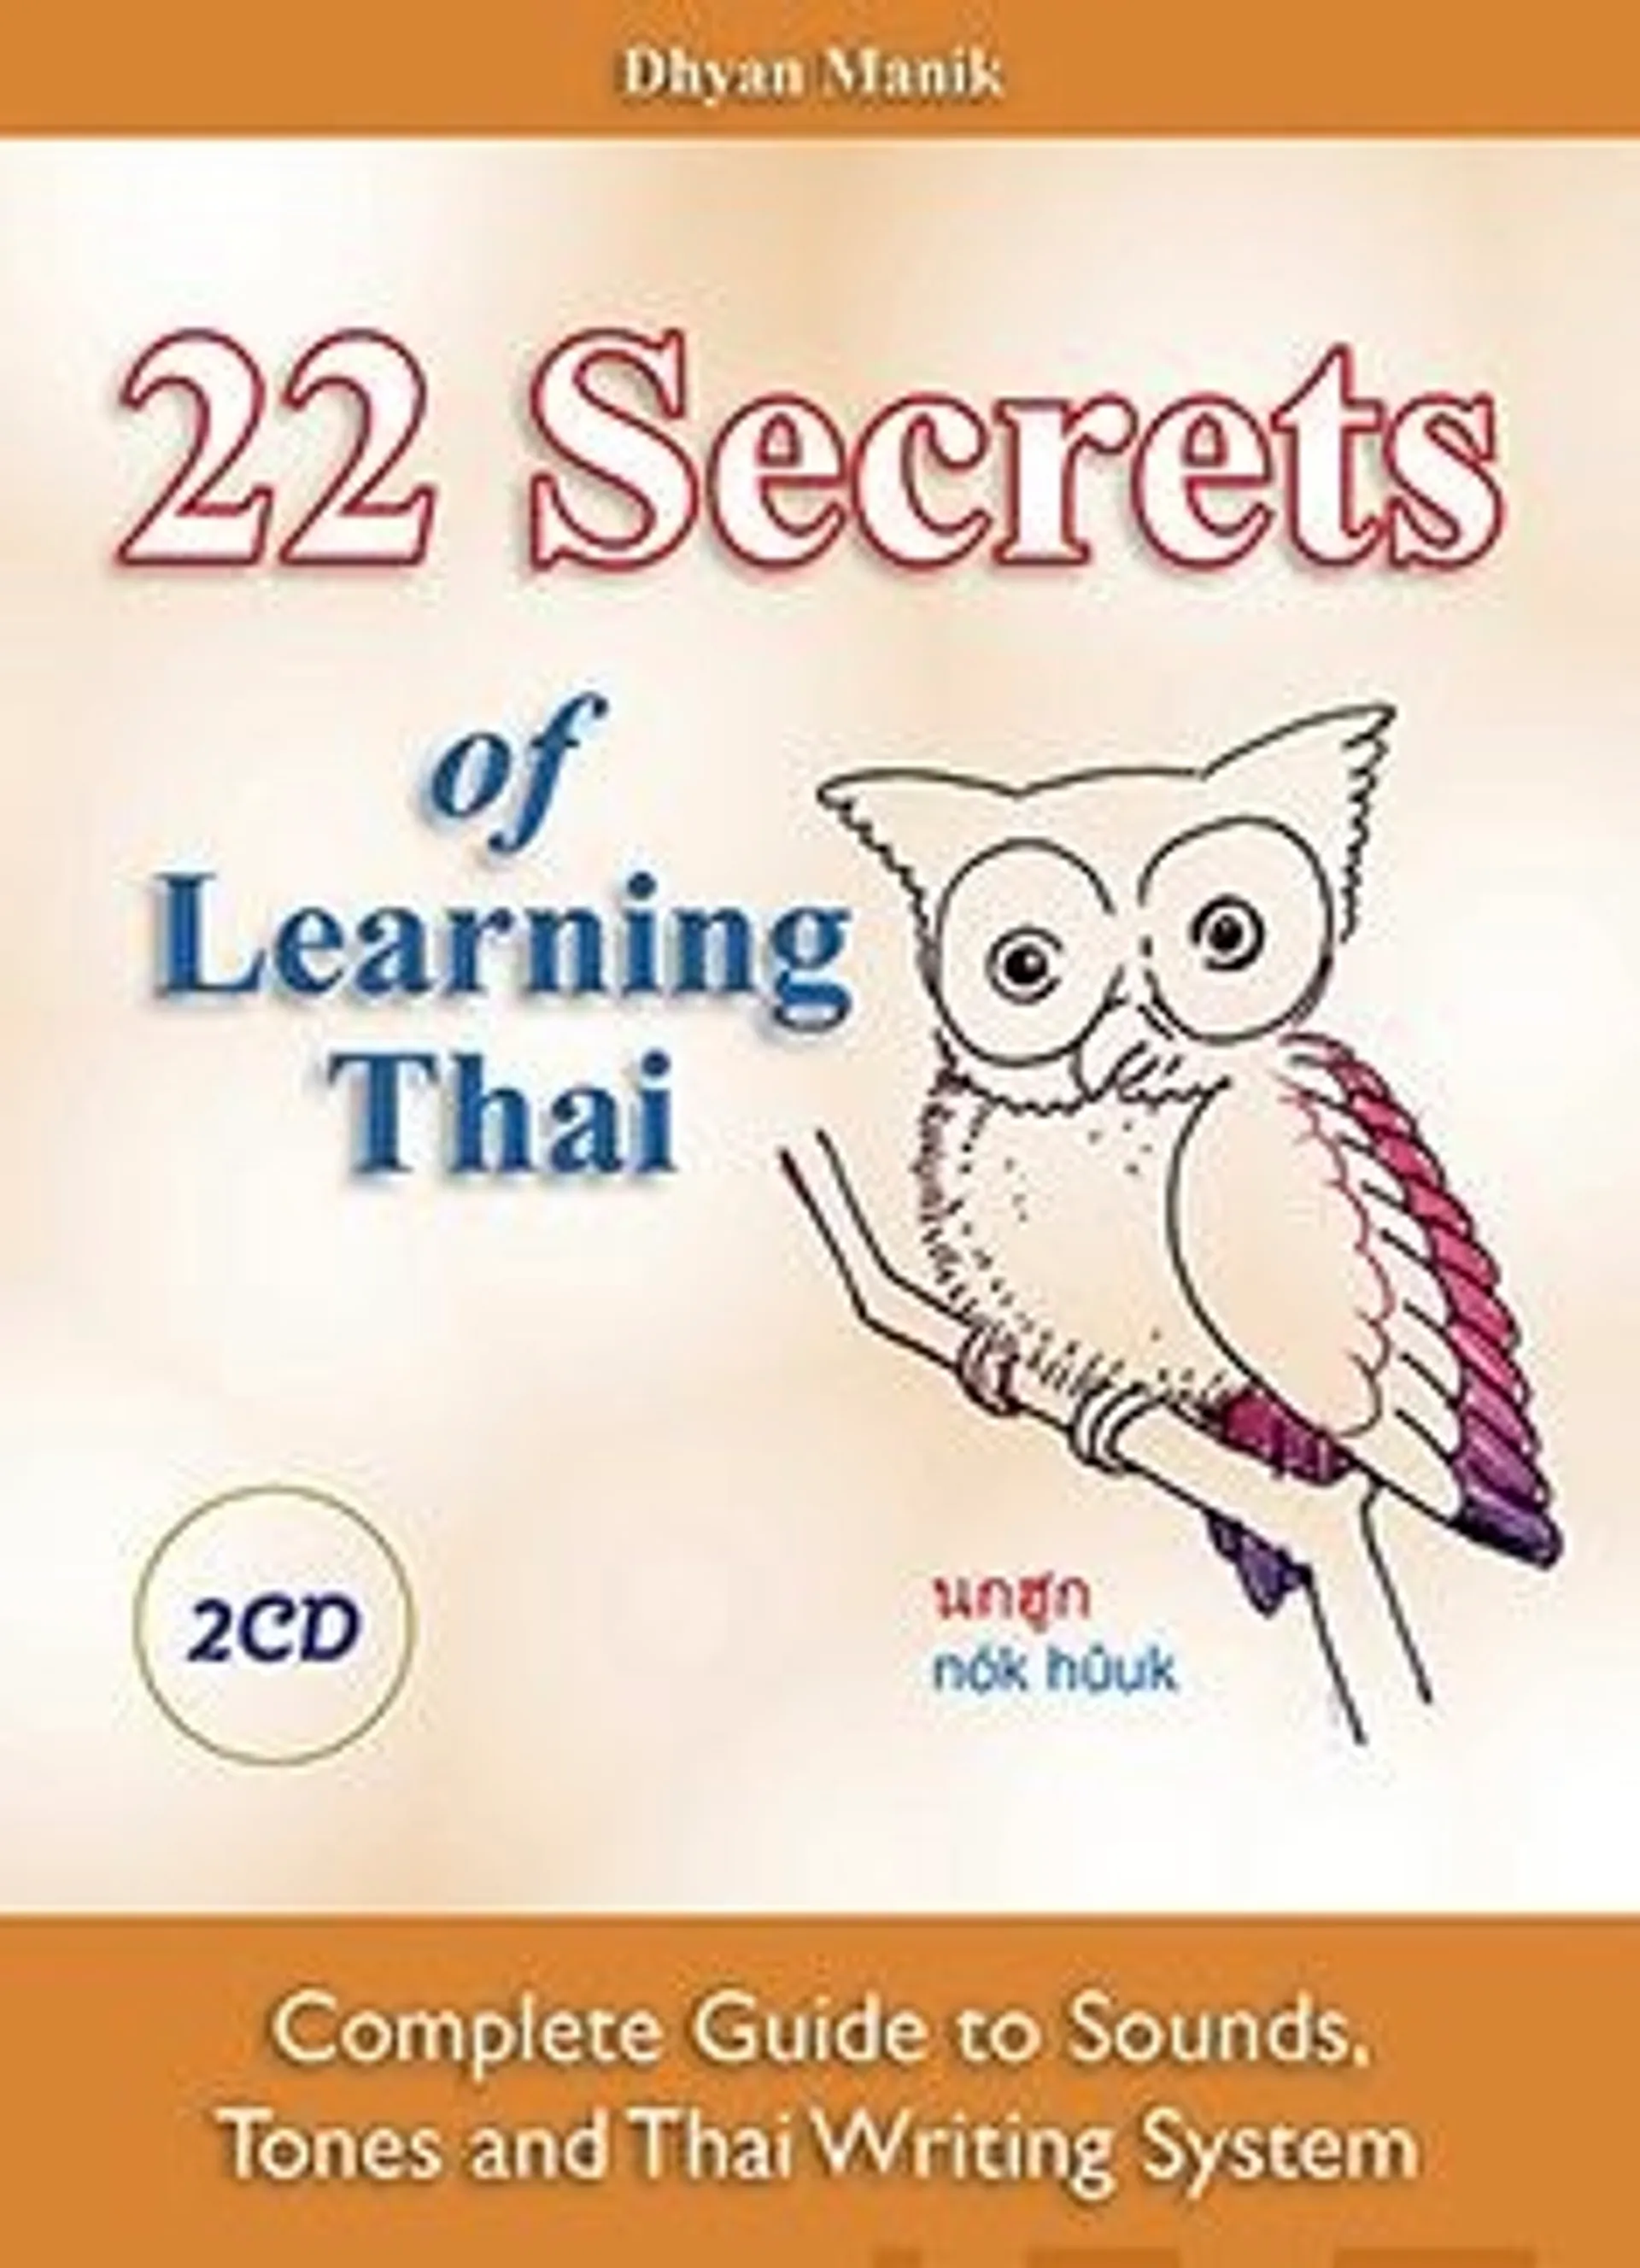 Manik, 22 Secrets of Learning Thai - Complete Guide to Sounds, Tones and Writing System (+2 cd)